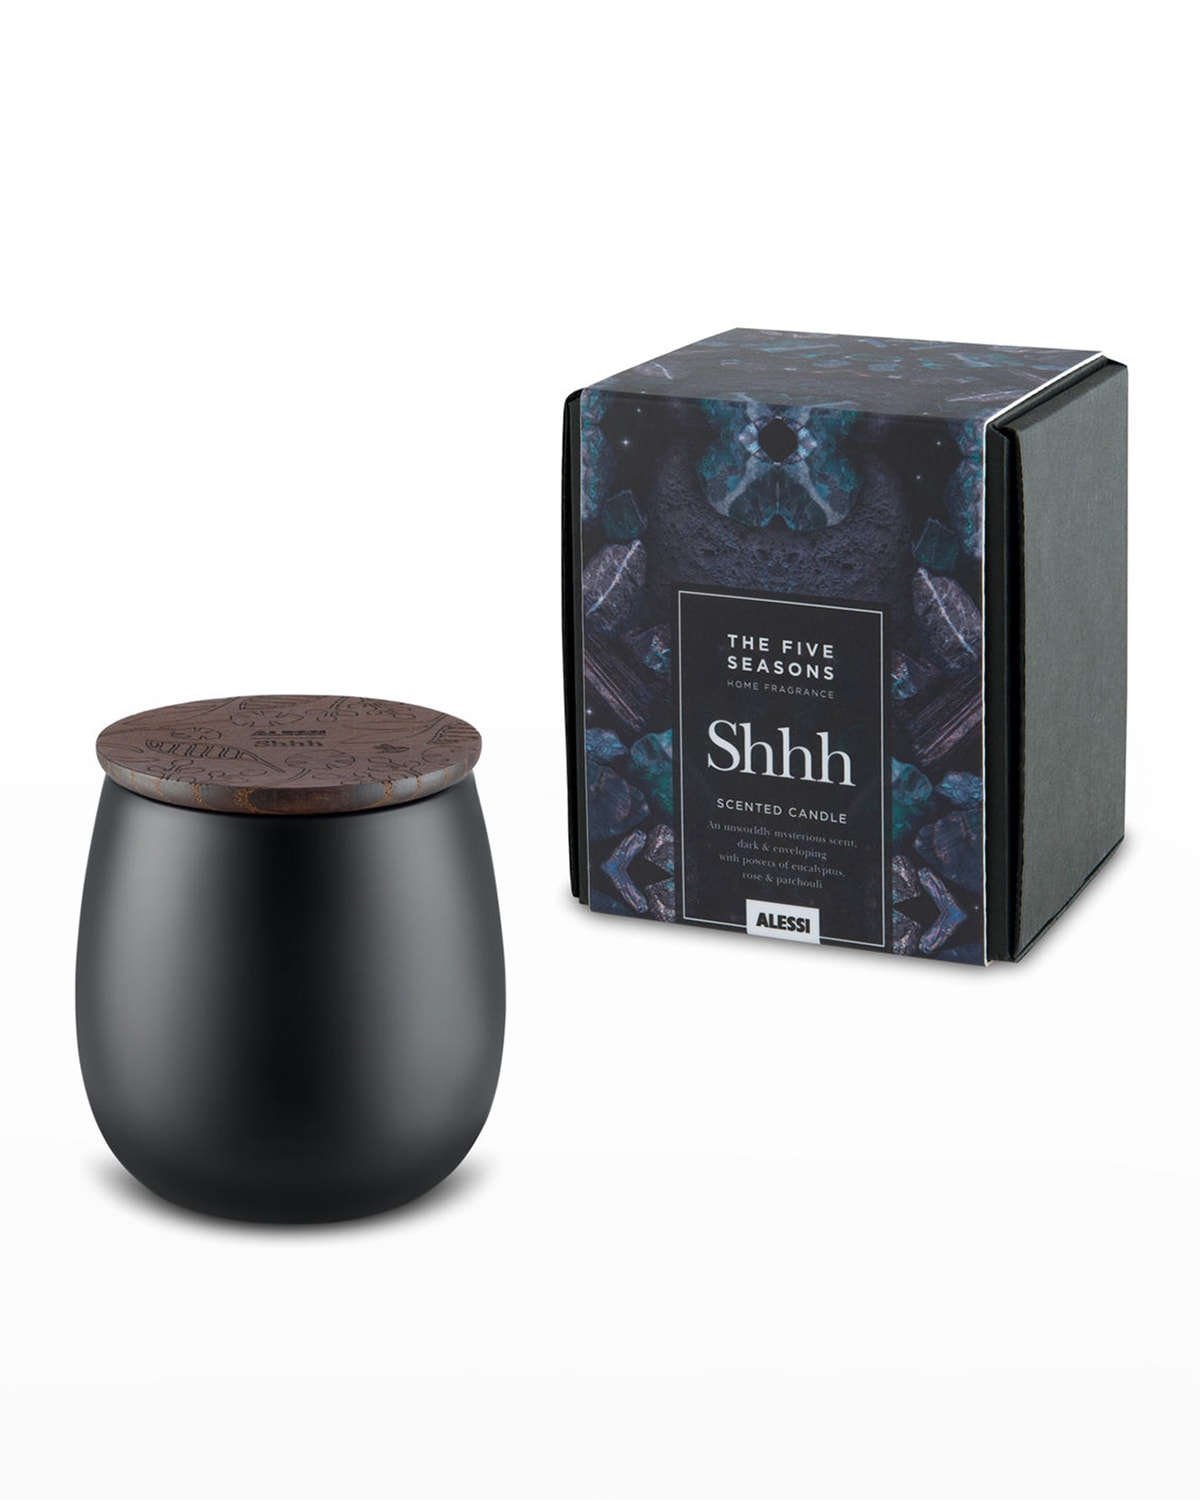 ALESSI SHHH SMALL CANDLE